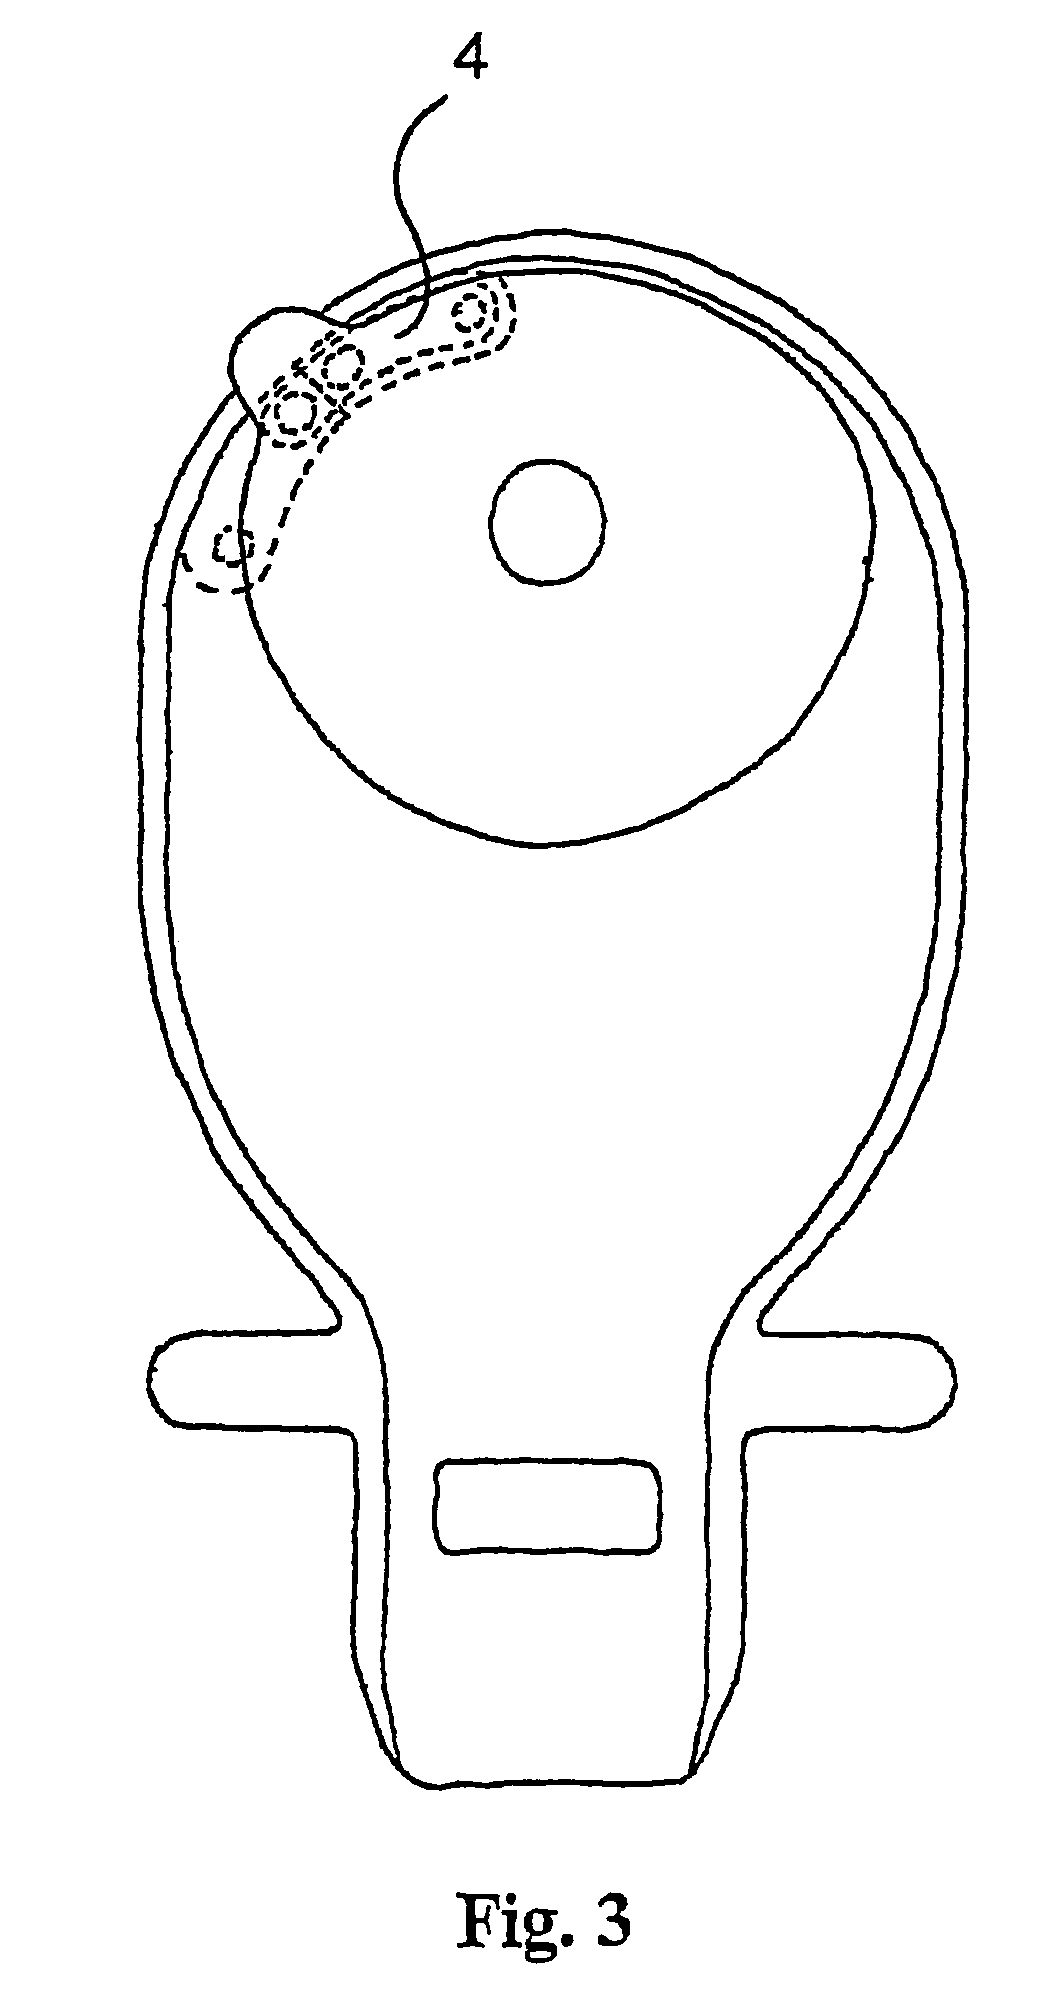 Ostomy appliance with multiple openings for preventing filter input blockage